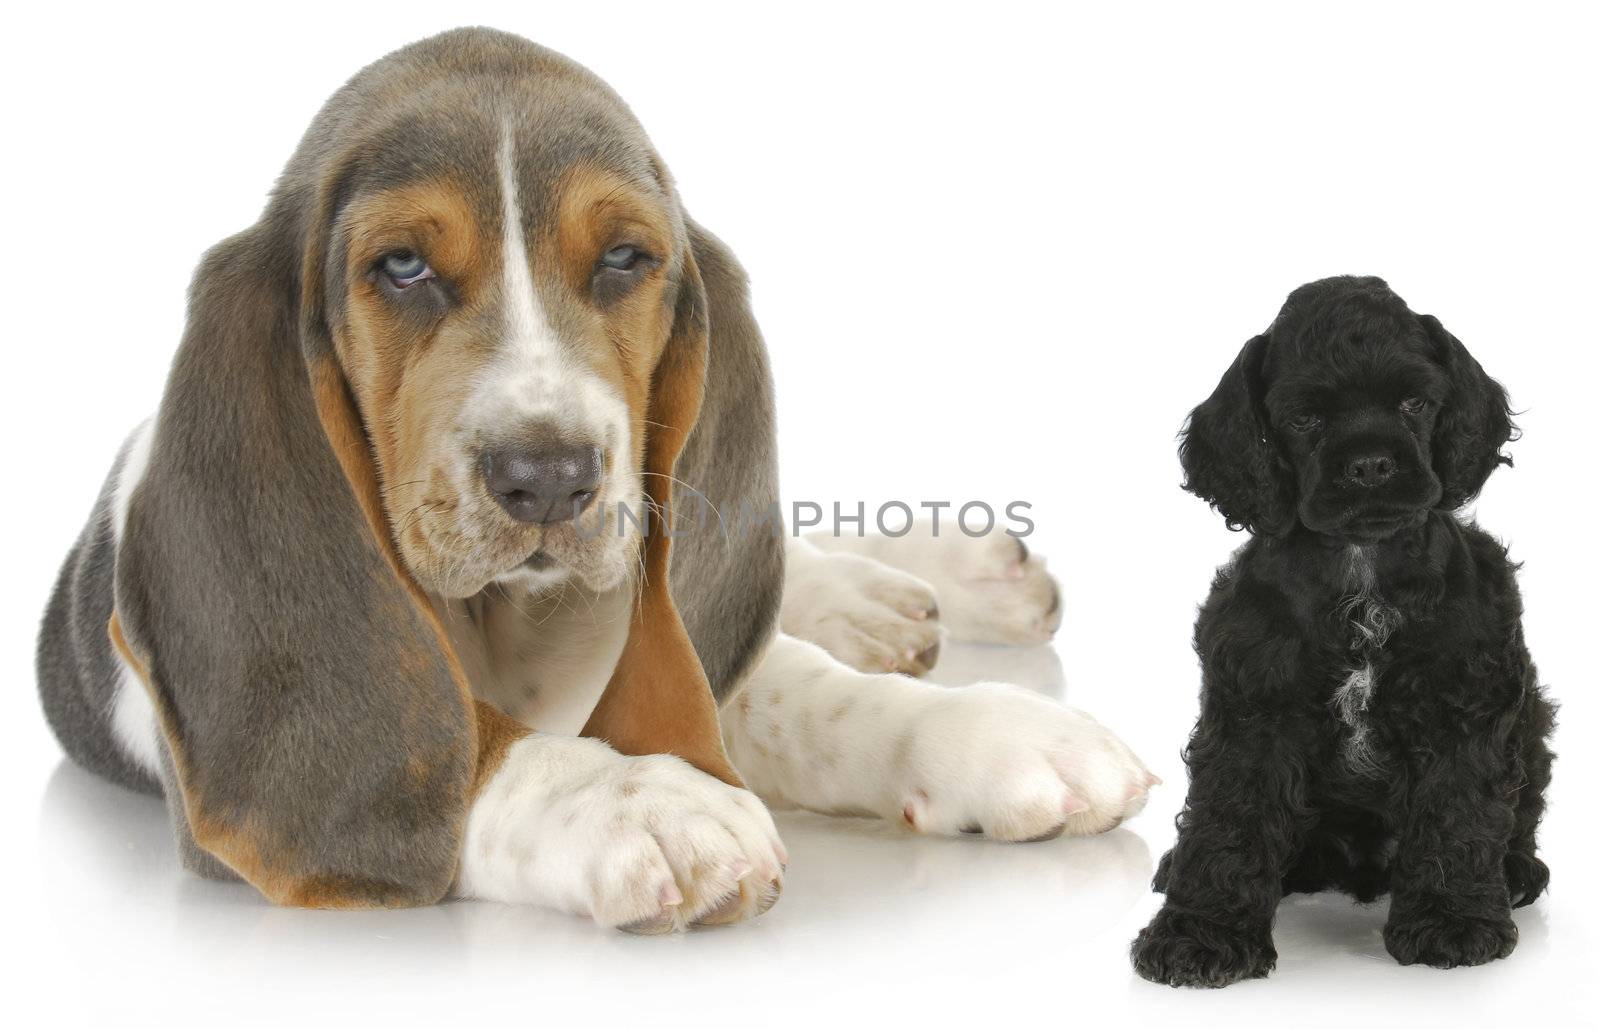 two puppies - basset hound and american cocker spaniel puppy - both eight weeks old